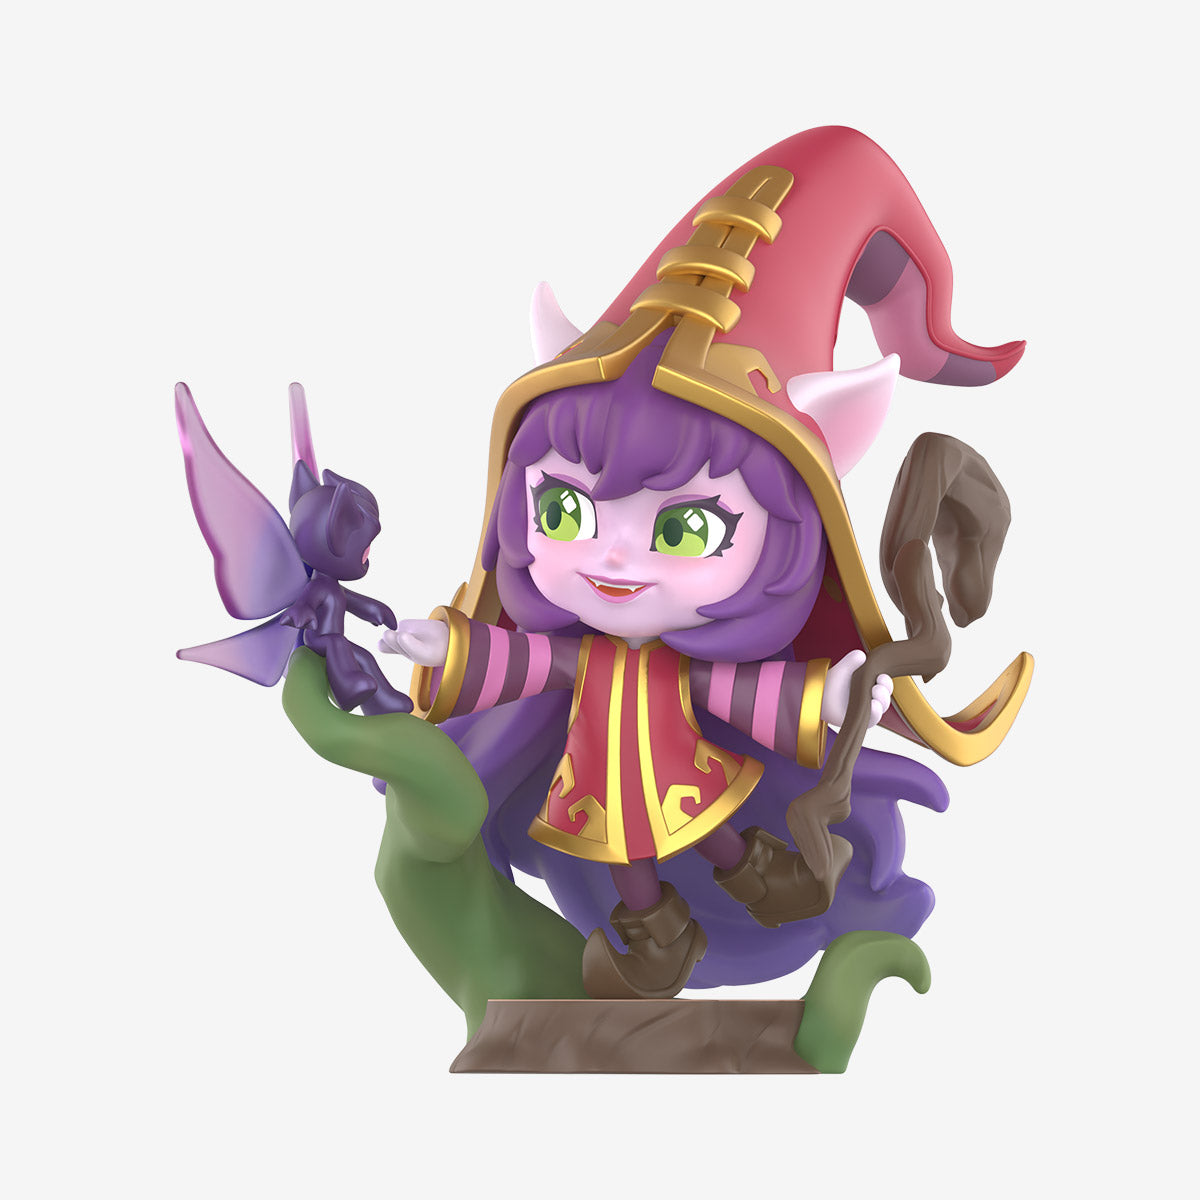 League of Legends Classic Characters Series Figures